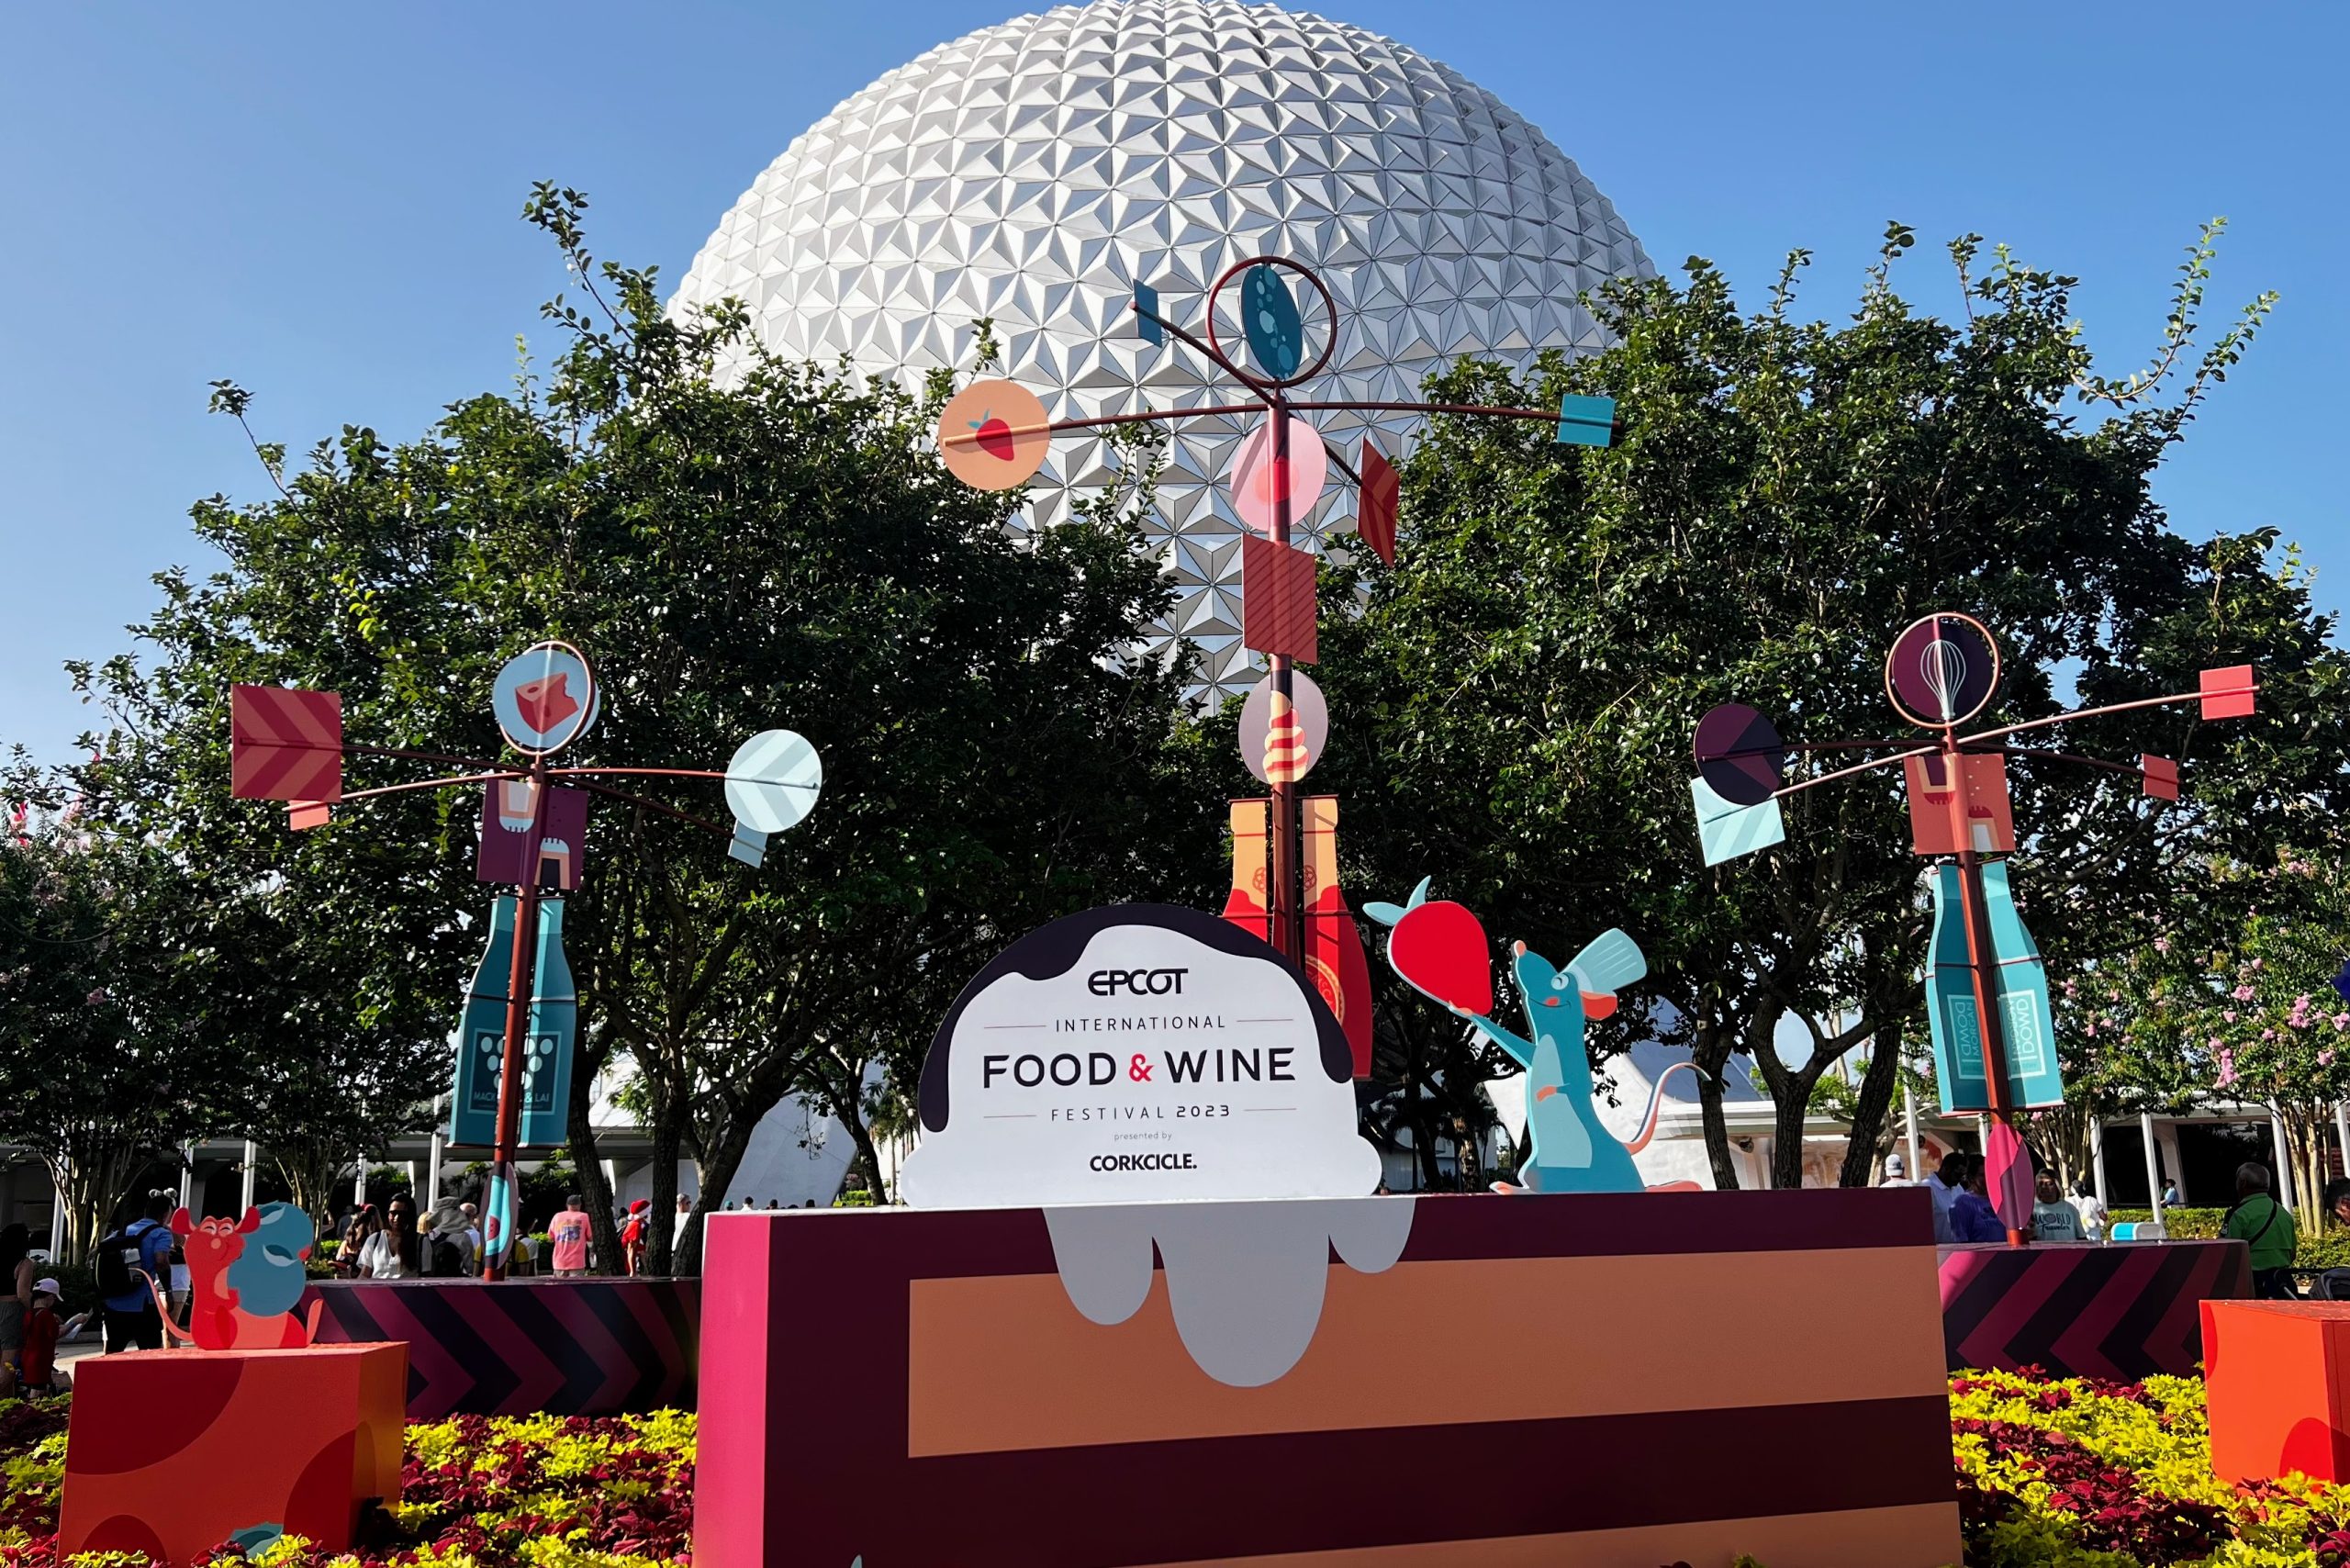 https://wdwprepschool.com/wp-content/uploads/2023-guide-and-tips-for-the-epcot-food-and-wine-festival-scaled.jpg